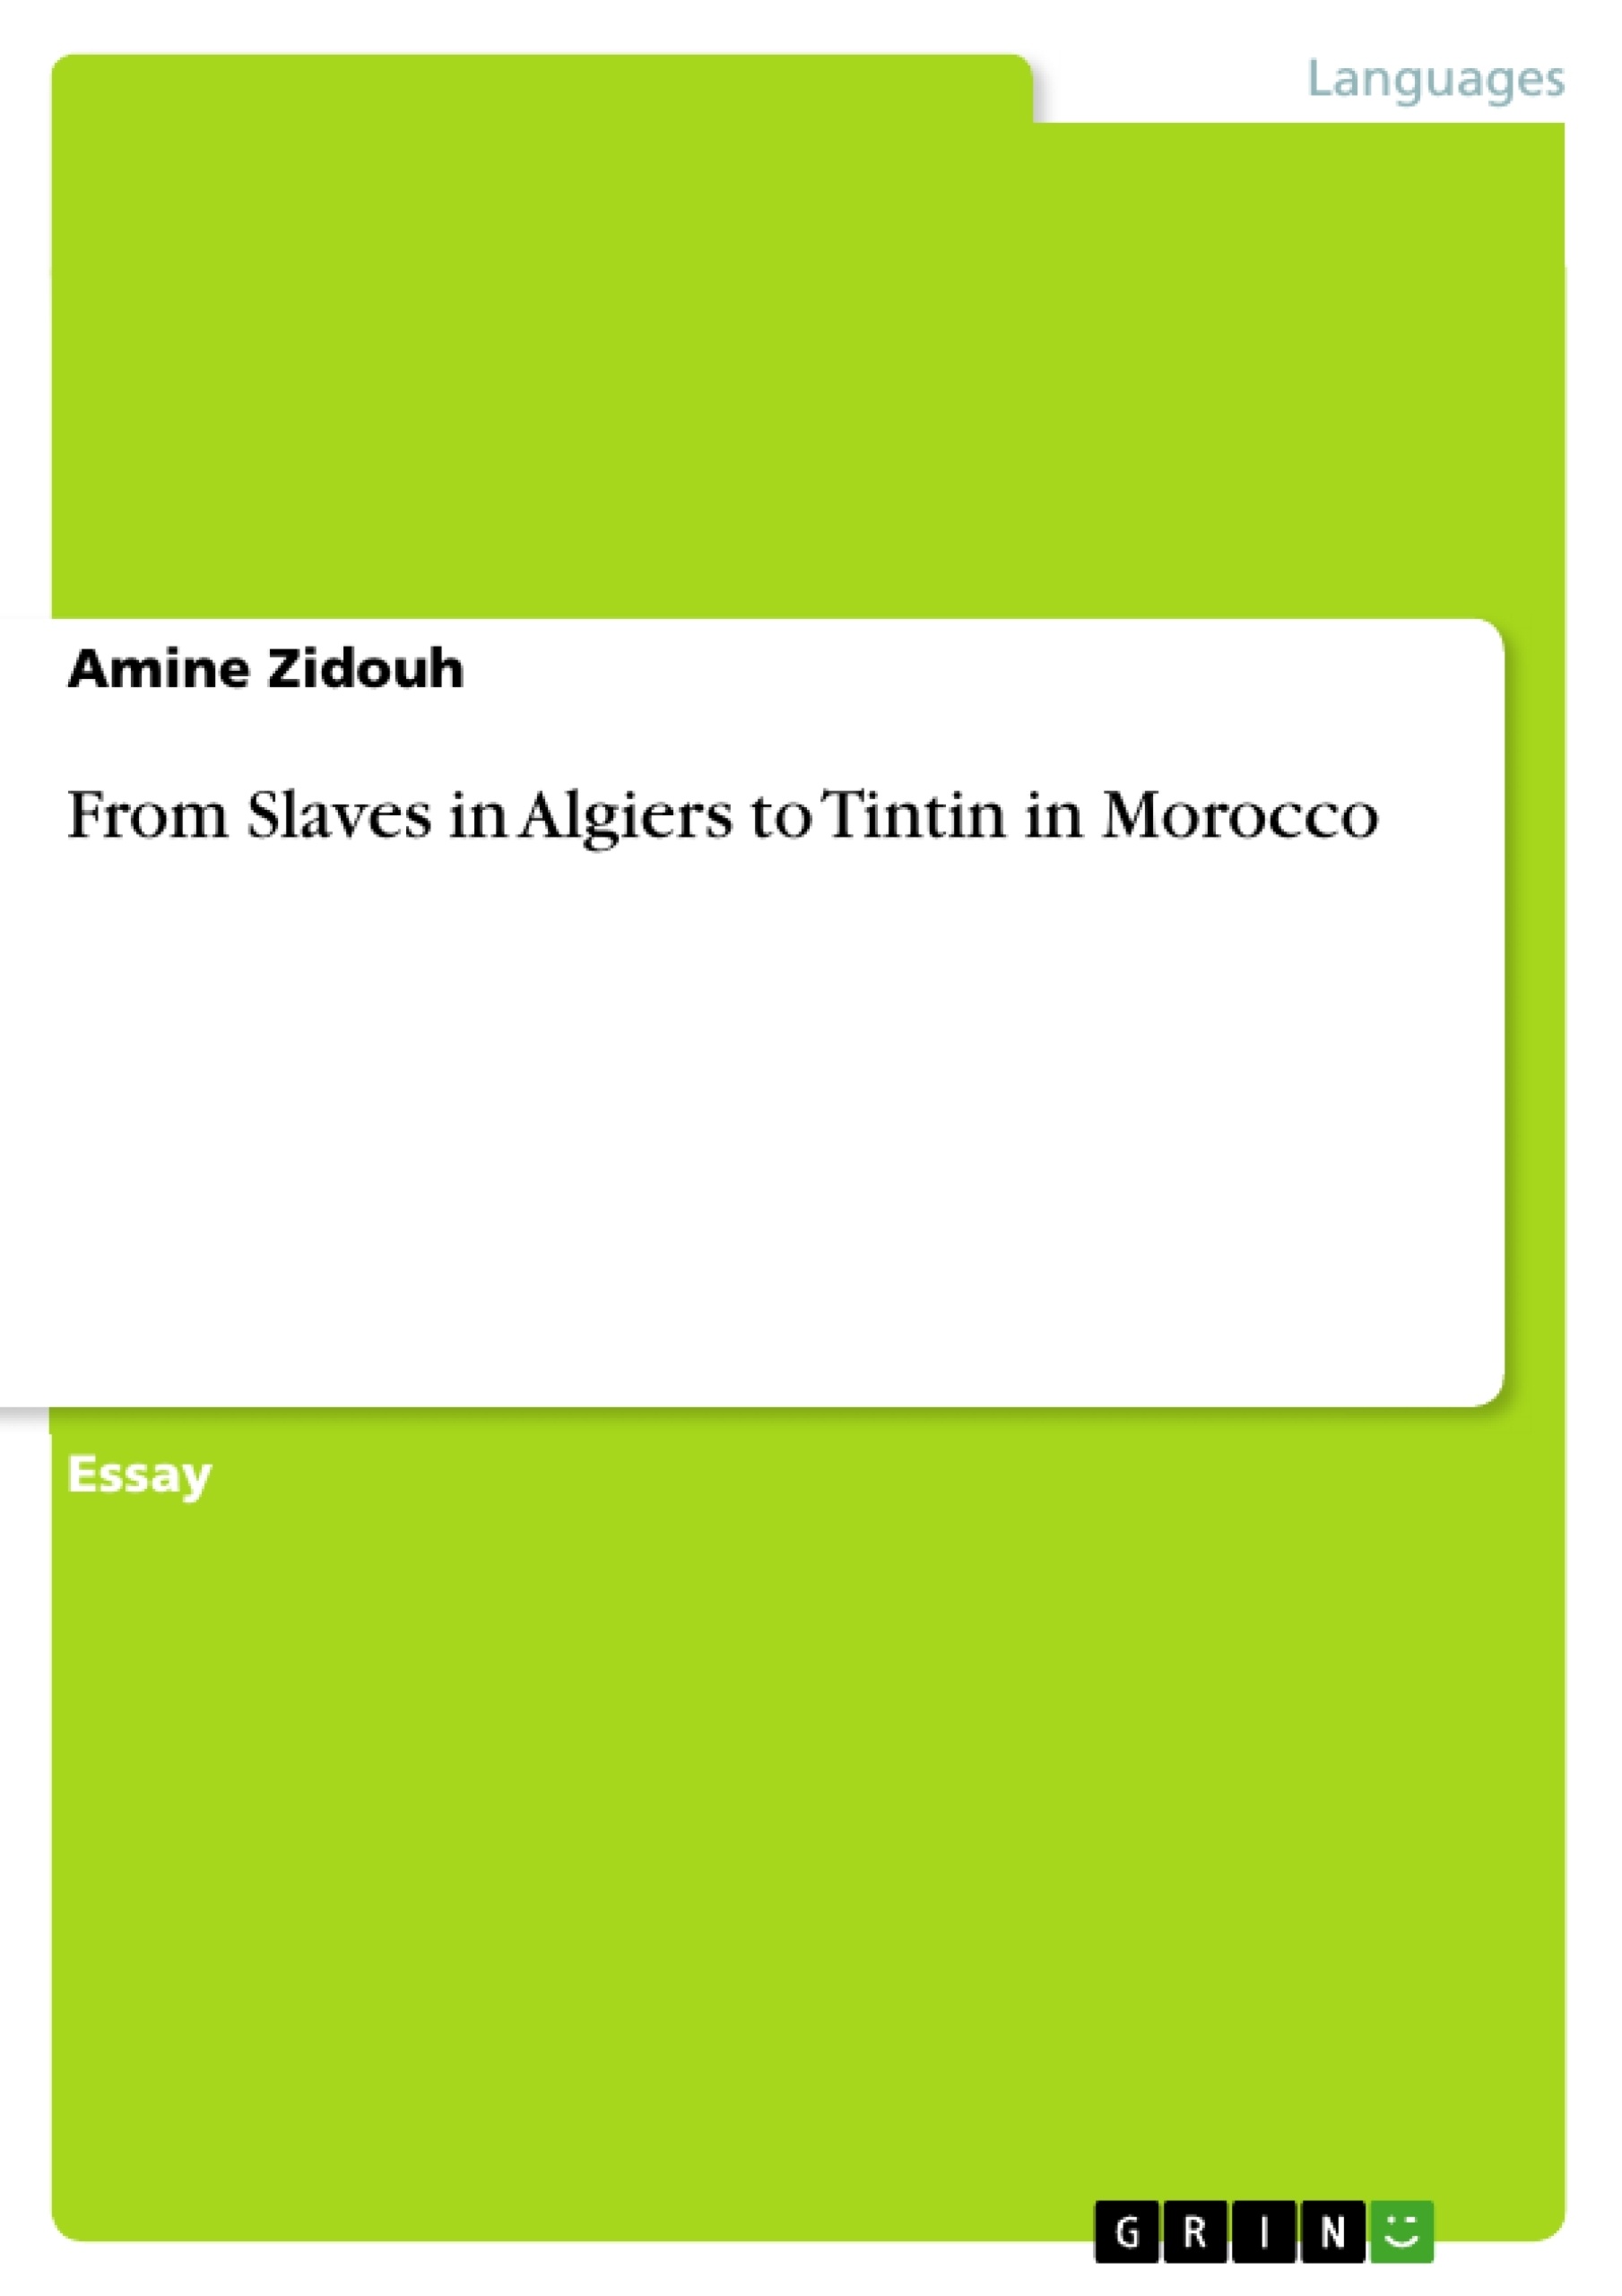 Title: From Slaves in Algiers to Tintin in Morocco